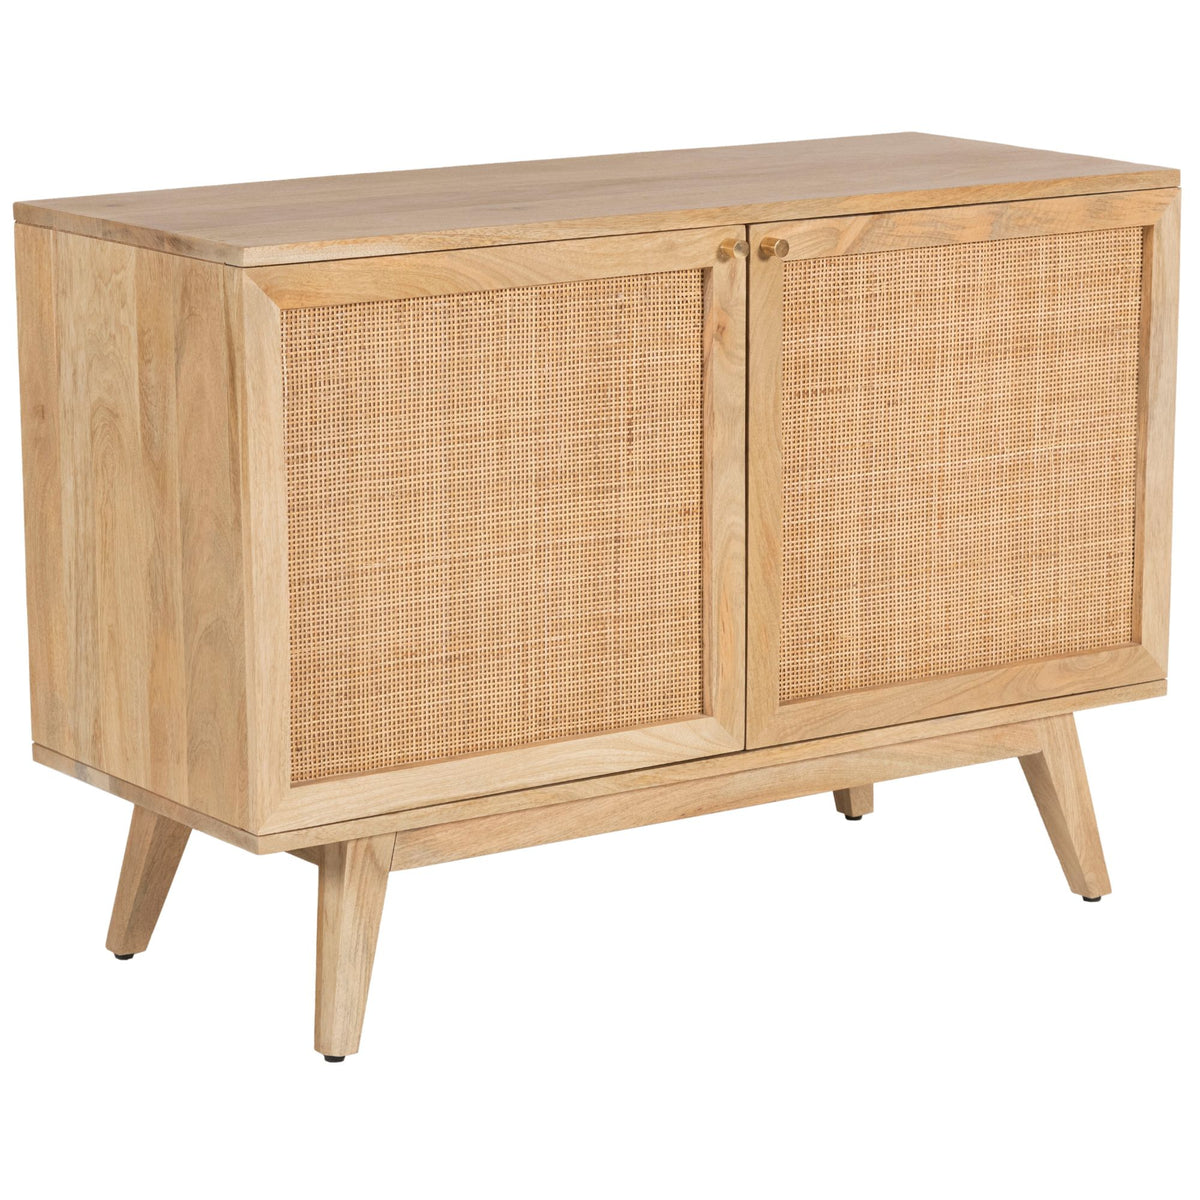 Olearia Buffet Table with 2 Door Solid Mango Wood in Natural - 100cm - Notbrand